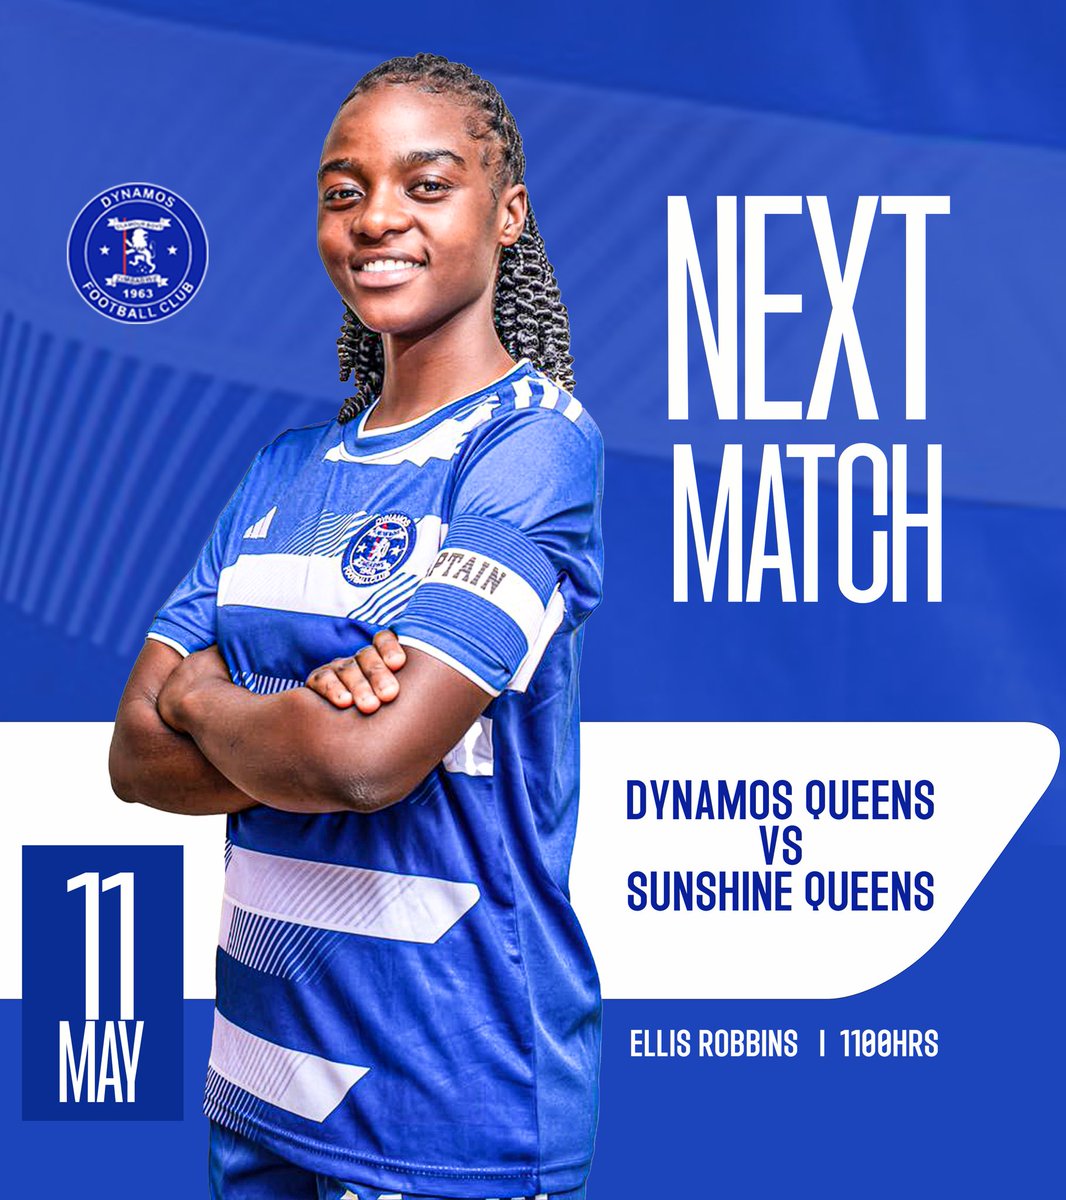 The Queens are in action this Saturday at Ellis Robbins, 1100hrs. Entrance is free!! #GlamourGirls